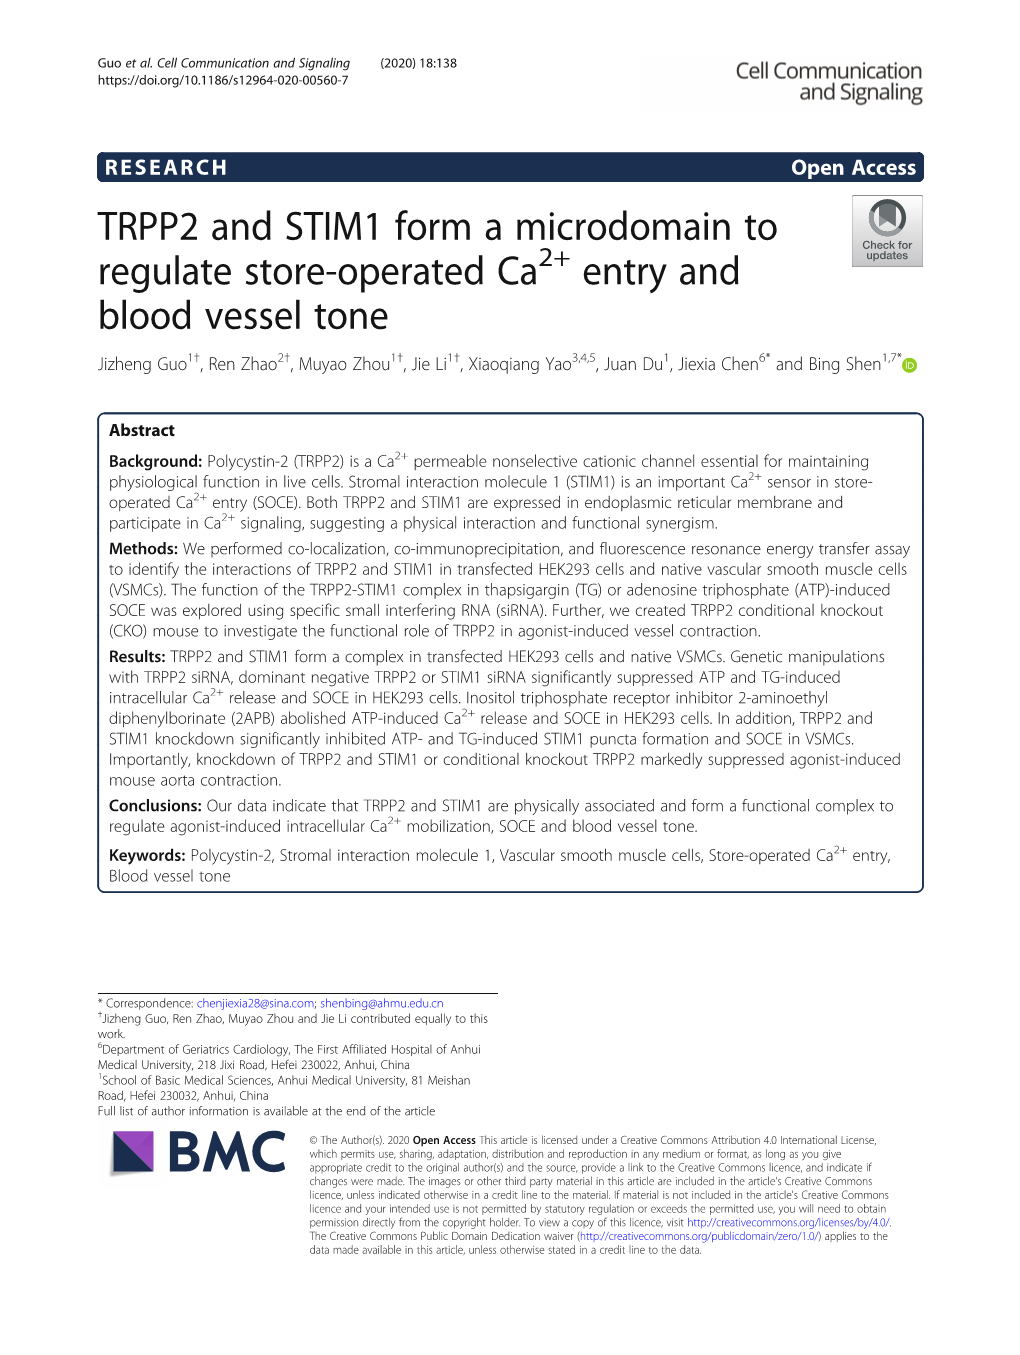 TRPP2 and STIM1 Form a Microdomain to Regulate Store